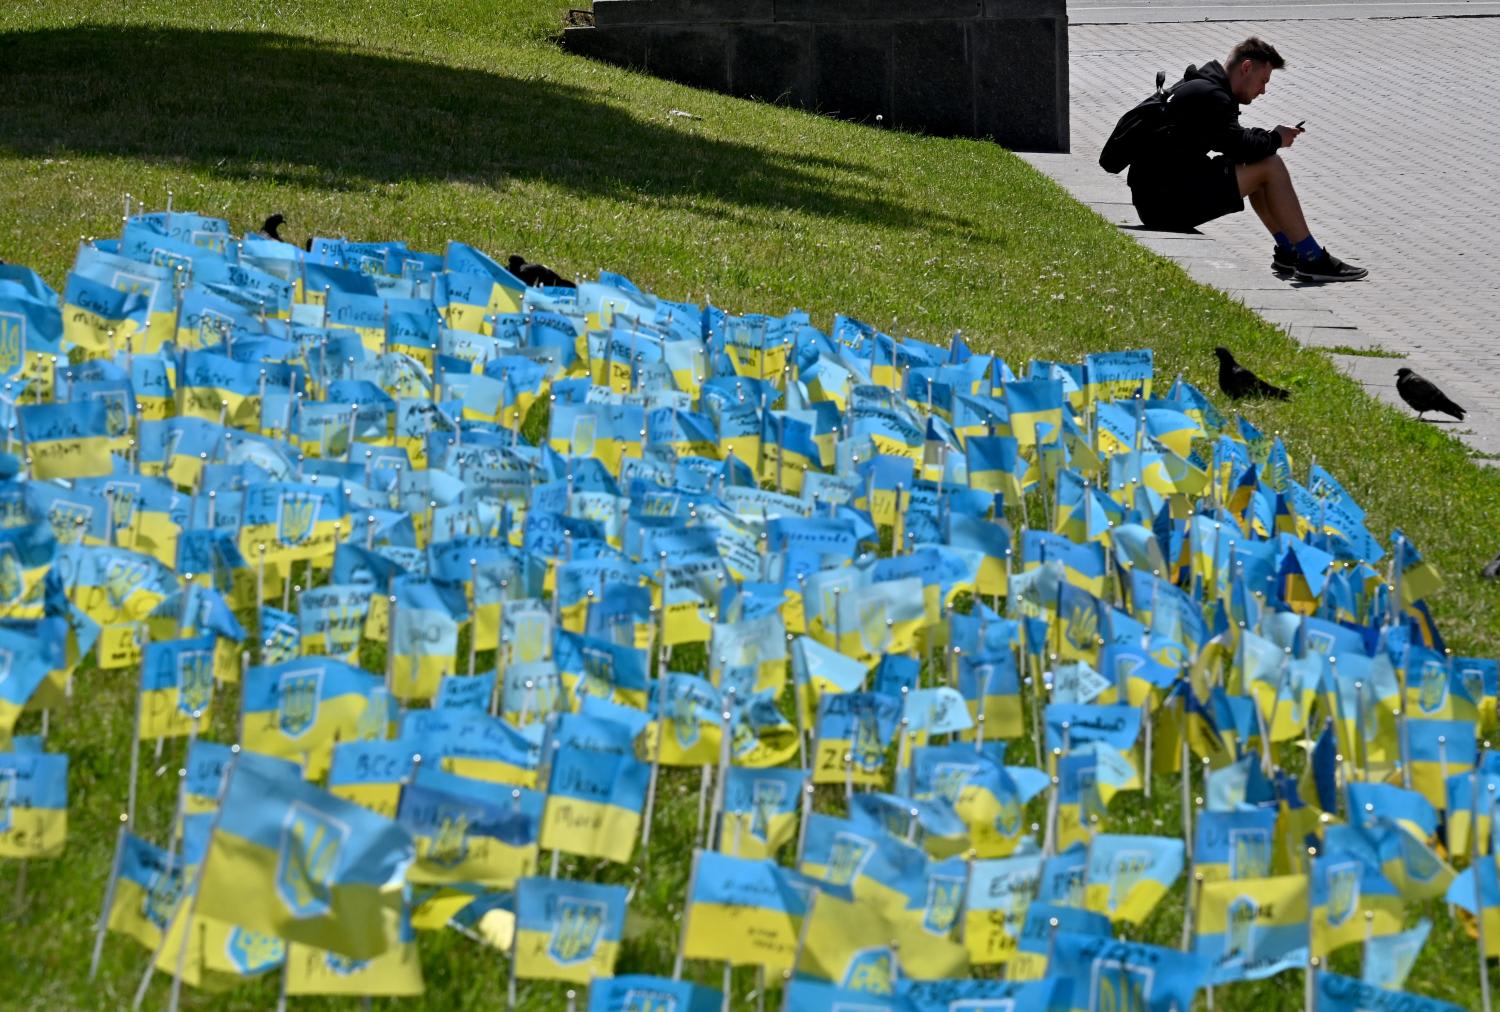 A grass plot decorated with small Ukrainian flags signed with the names of the Ukrainian servicemen killed in the war with Russia, in the center of Ukrainian capital of Kyiv on June 22, 2022.